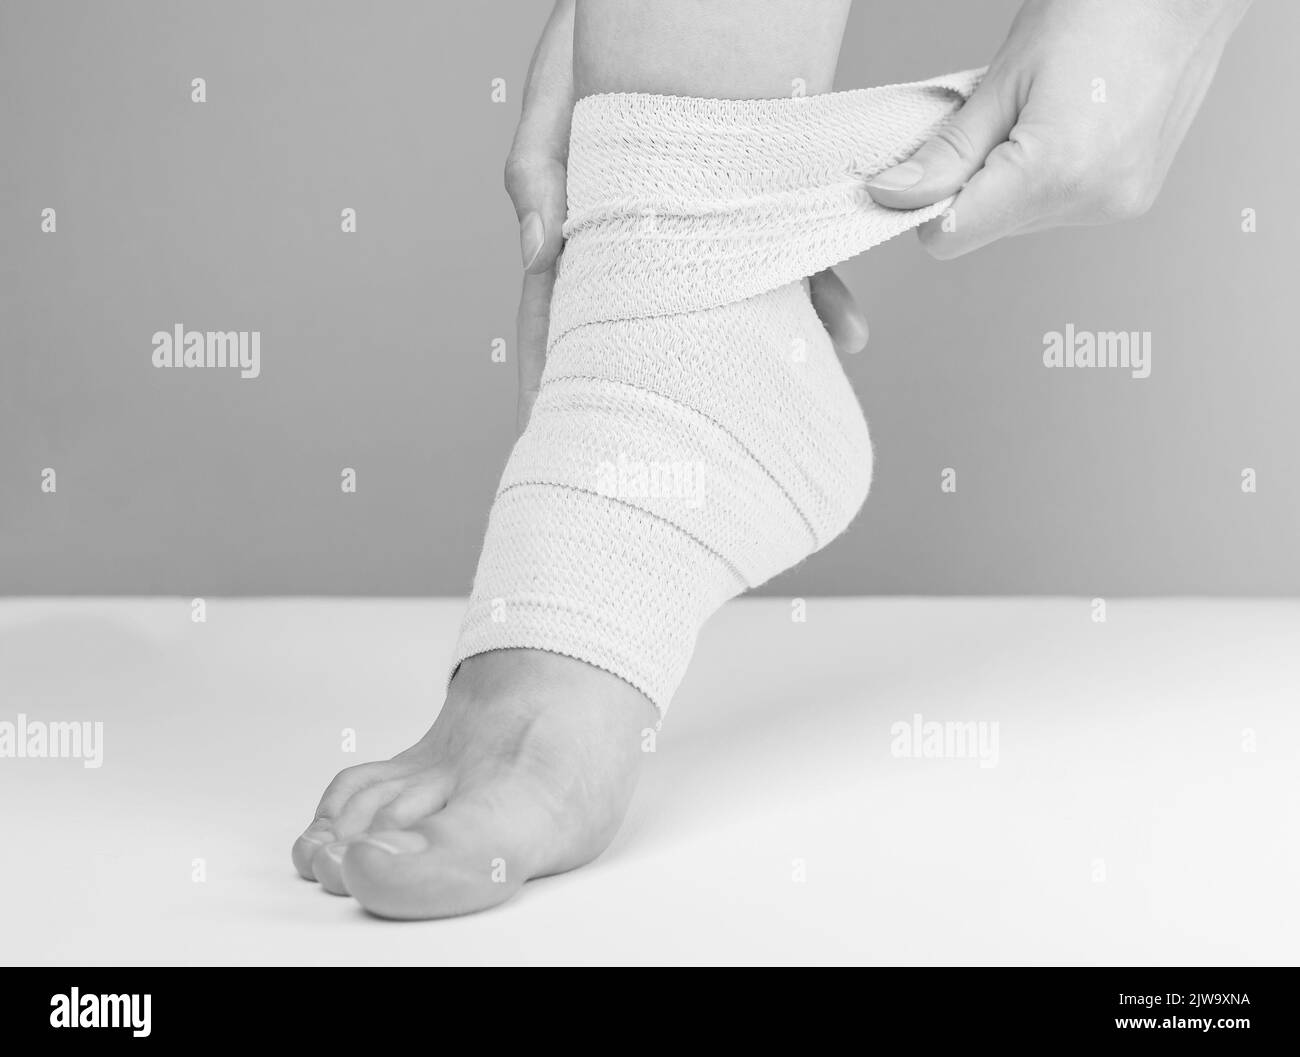 Applying elastic bandage on foot, ankle for recovery from strain, sprain, injury. High quality photo Stock Photo